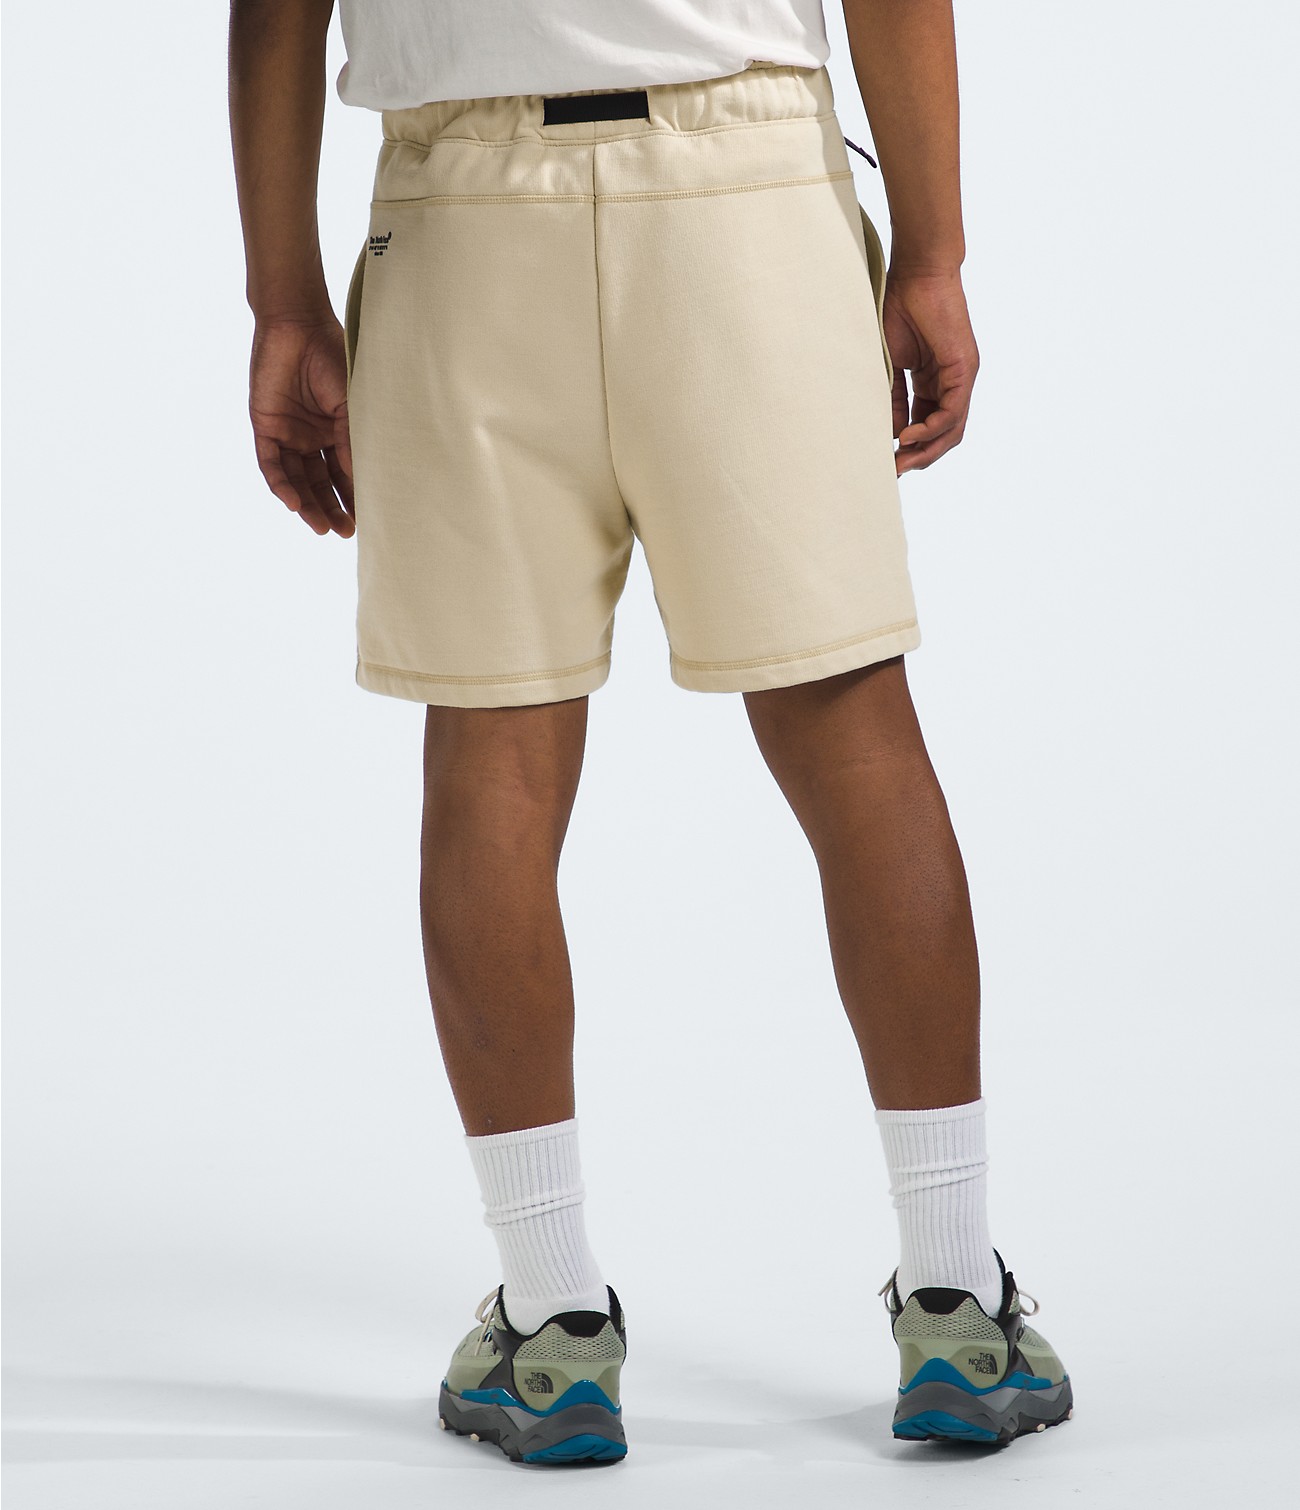 Men’s AXYS Shorts | The North Face